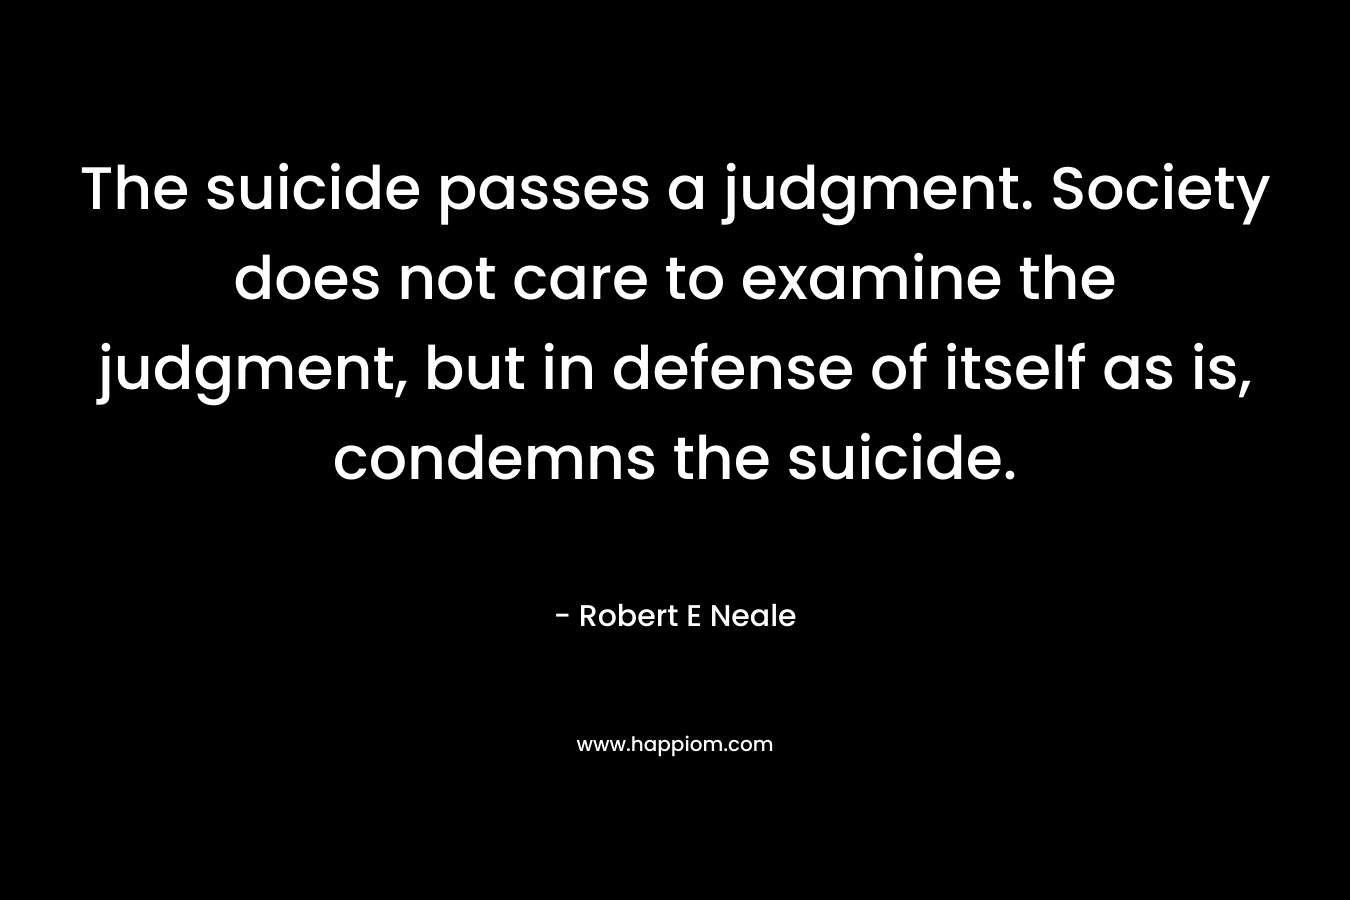 The suicide passes a judgment. Society does not care to examine the judgment, but in defense of itself as is, condemns the suicide.